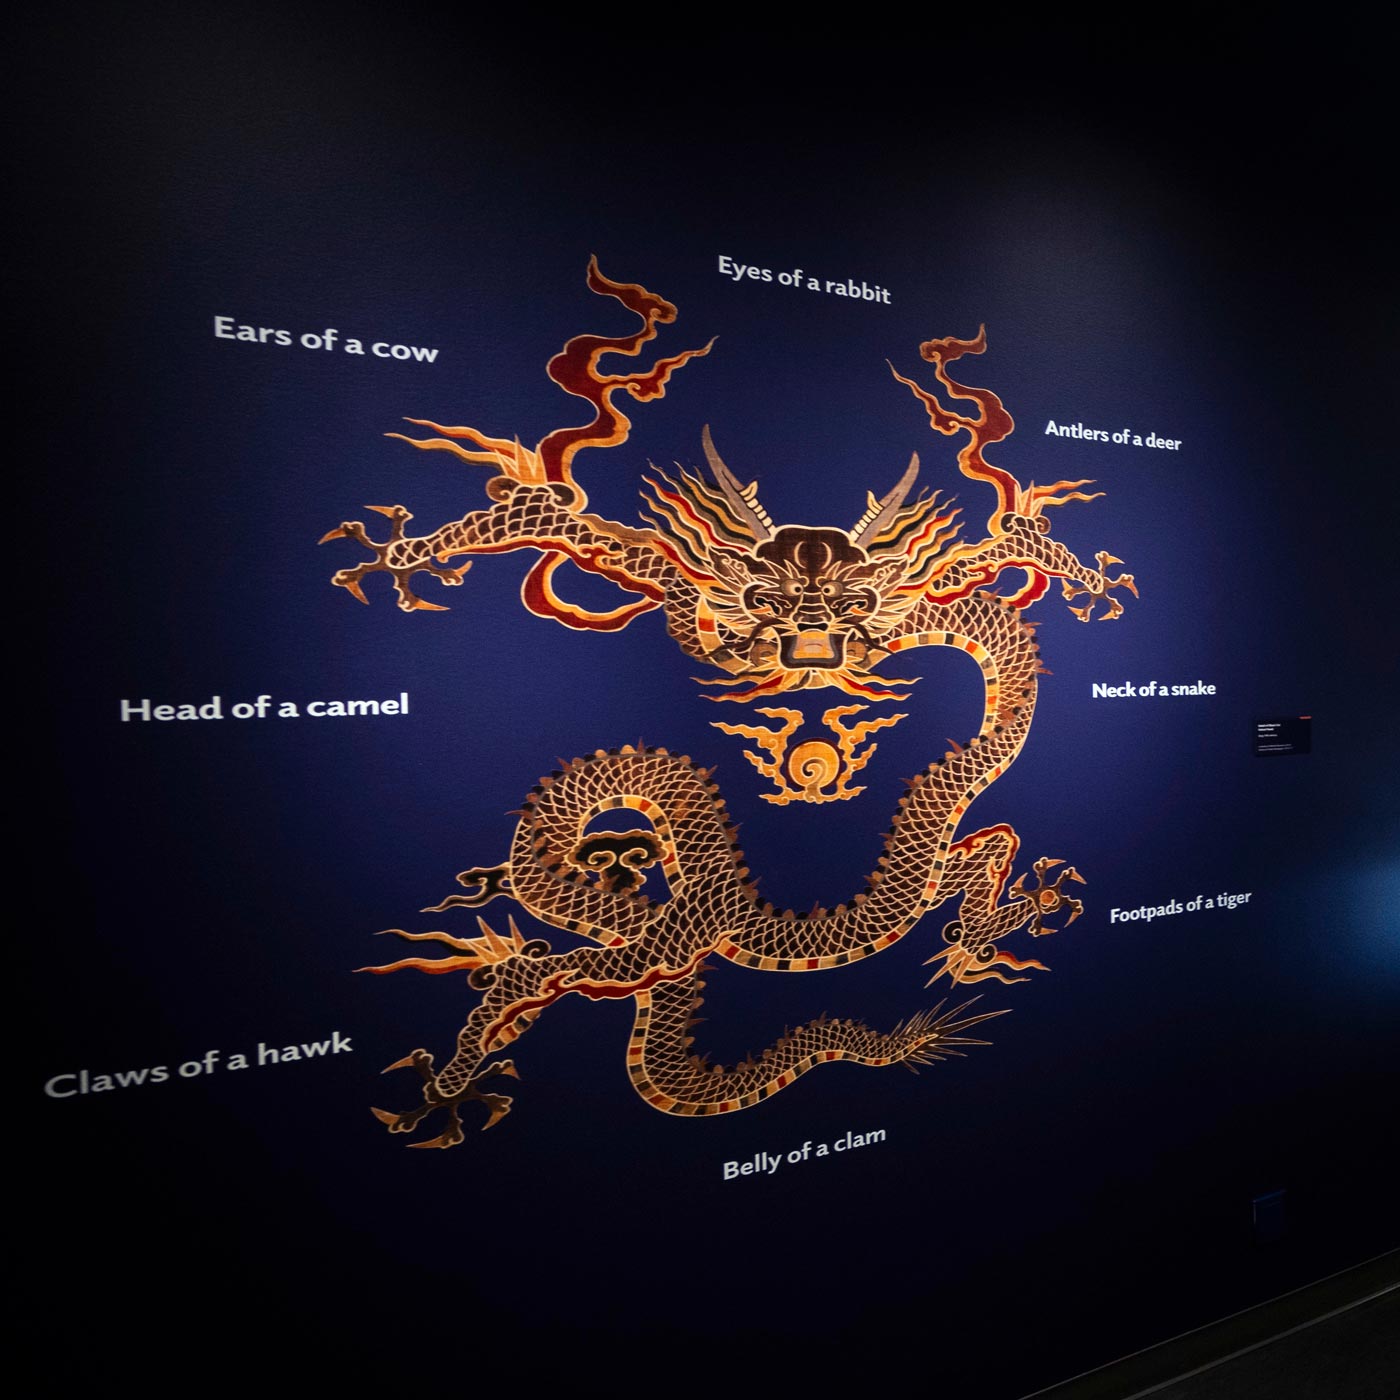 Reproduction of a Chinese dragon image showing the various animal parts they take their shape from